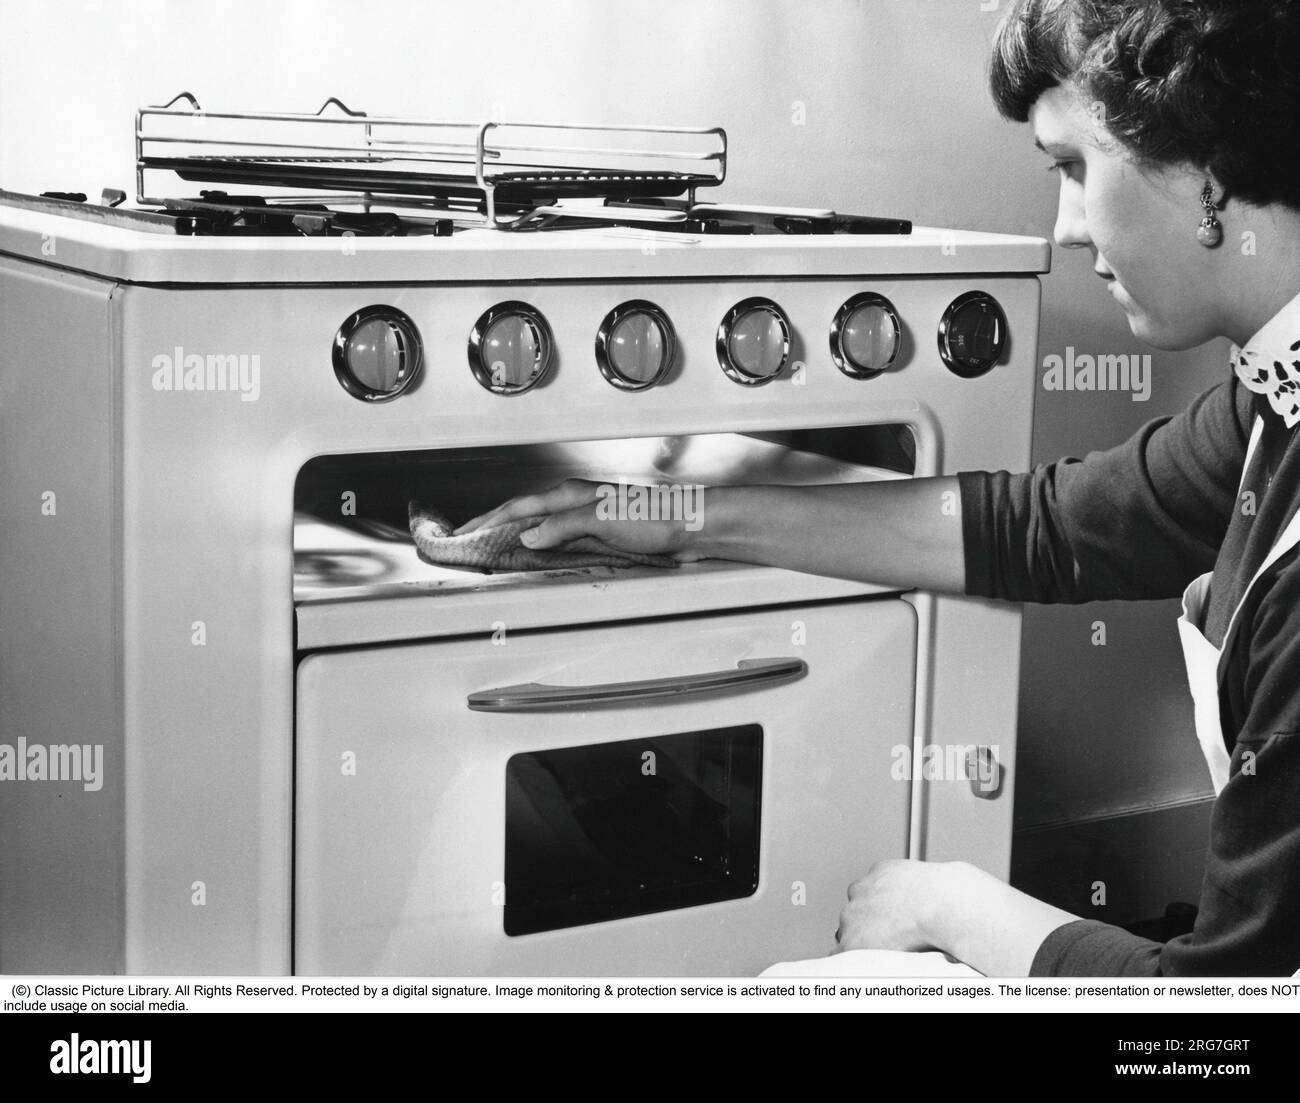 In the kitchen in the 1950s. A young woman in the kitchen at the brand new Kockums gas cooker. She is seen demonstrating the practical function of having a enameled spill plate under the burners and how easy it is to clean even from the largest boil-overs. Sweden 1956. Stock Photo